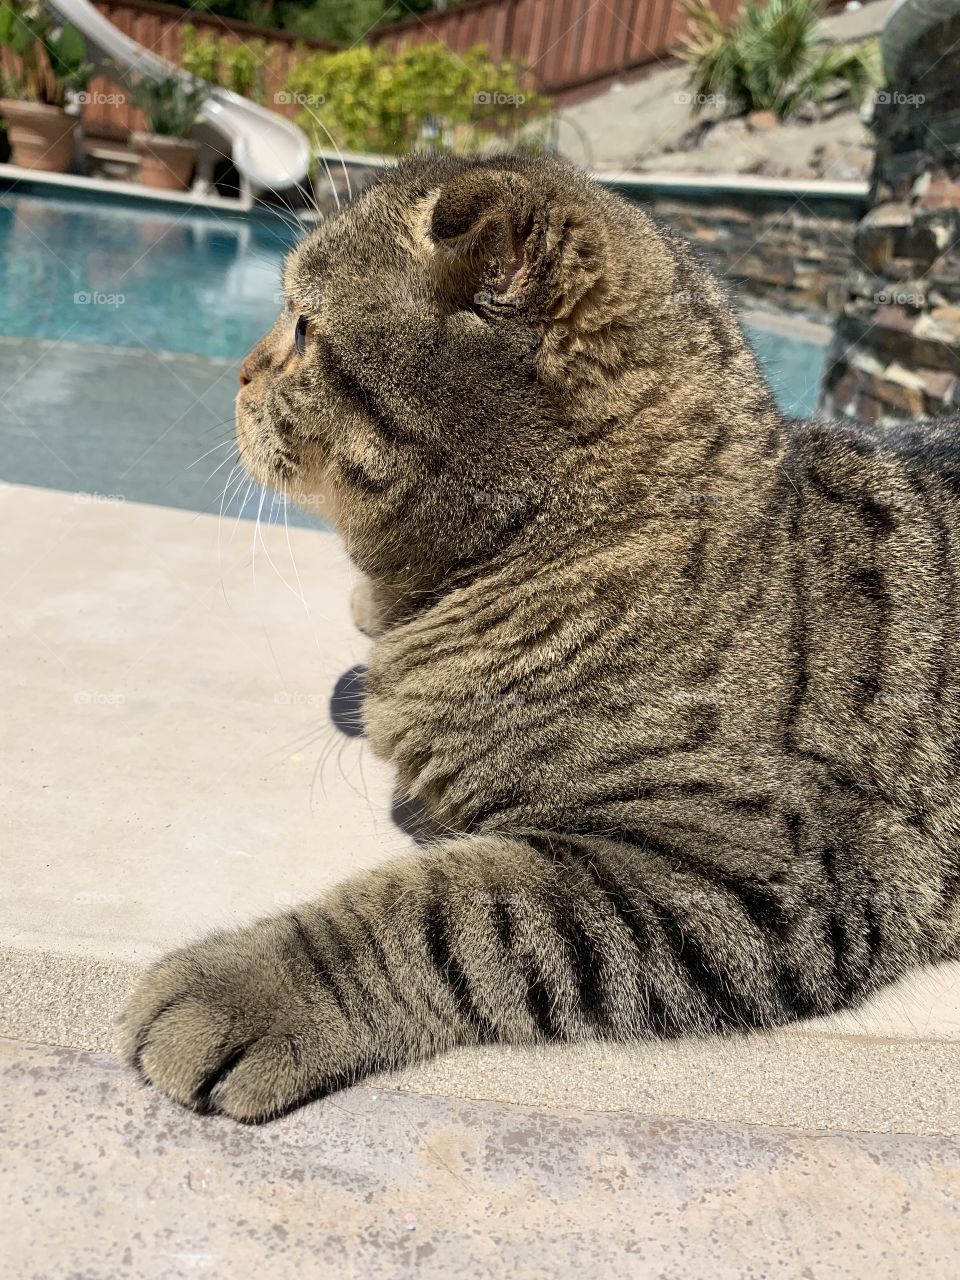 Our Tiger cat by our pool